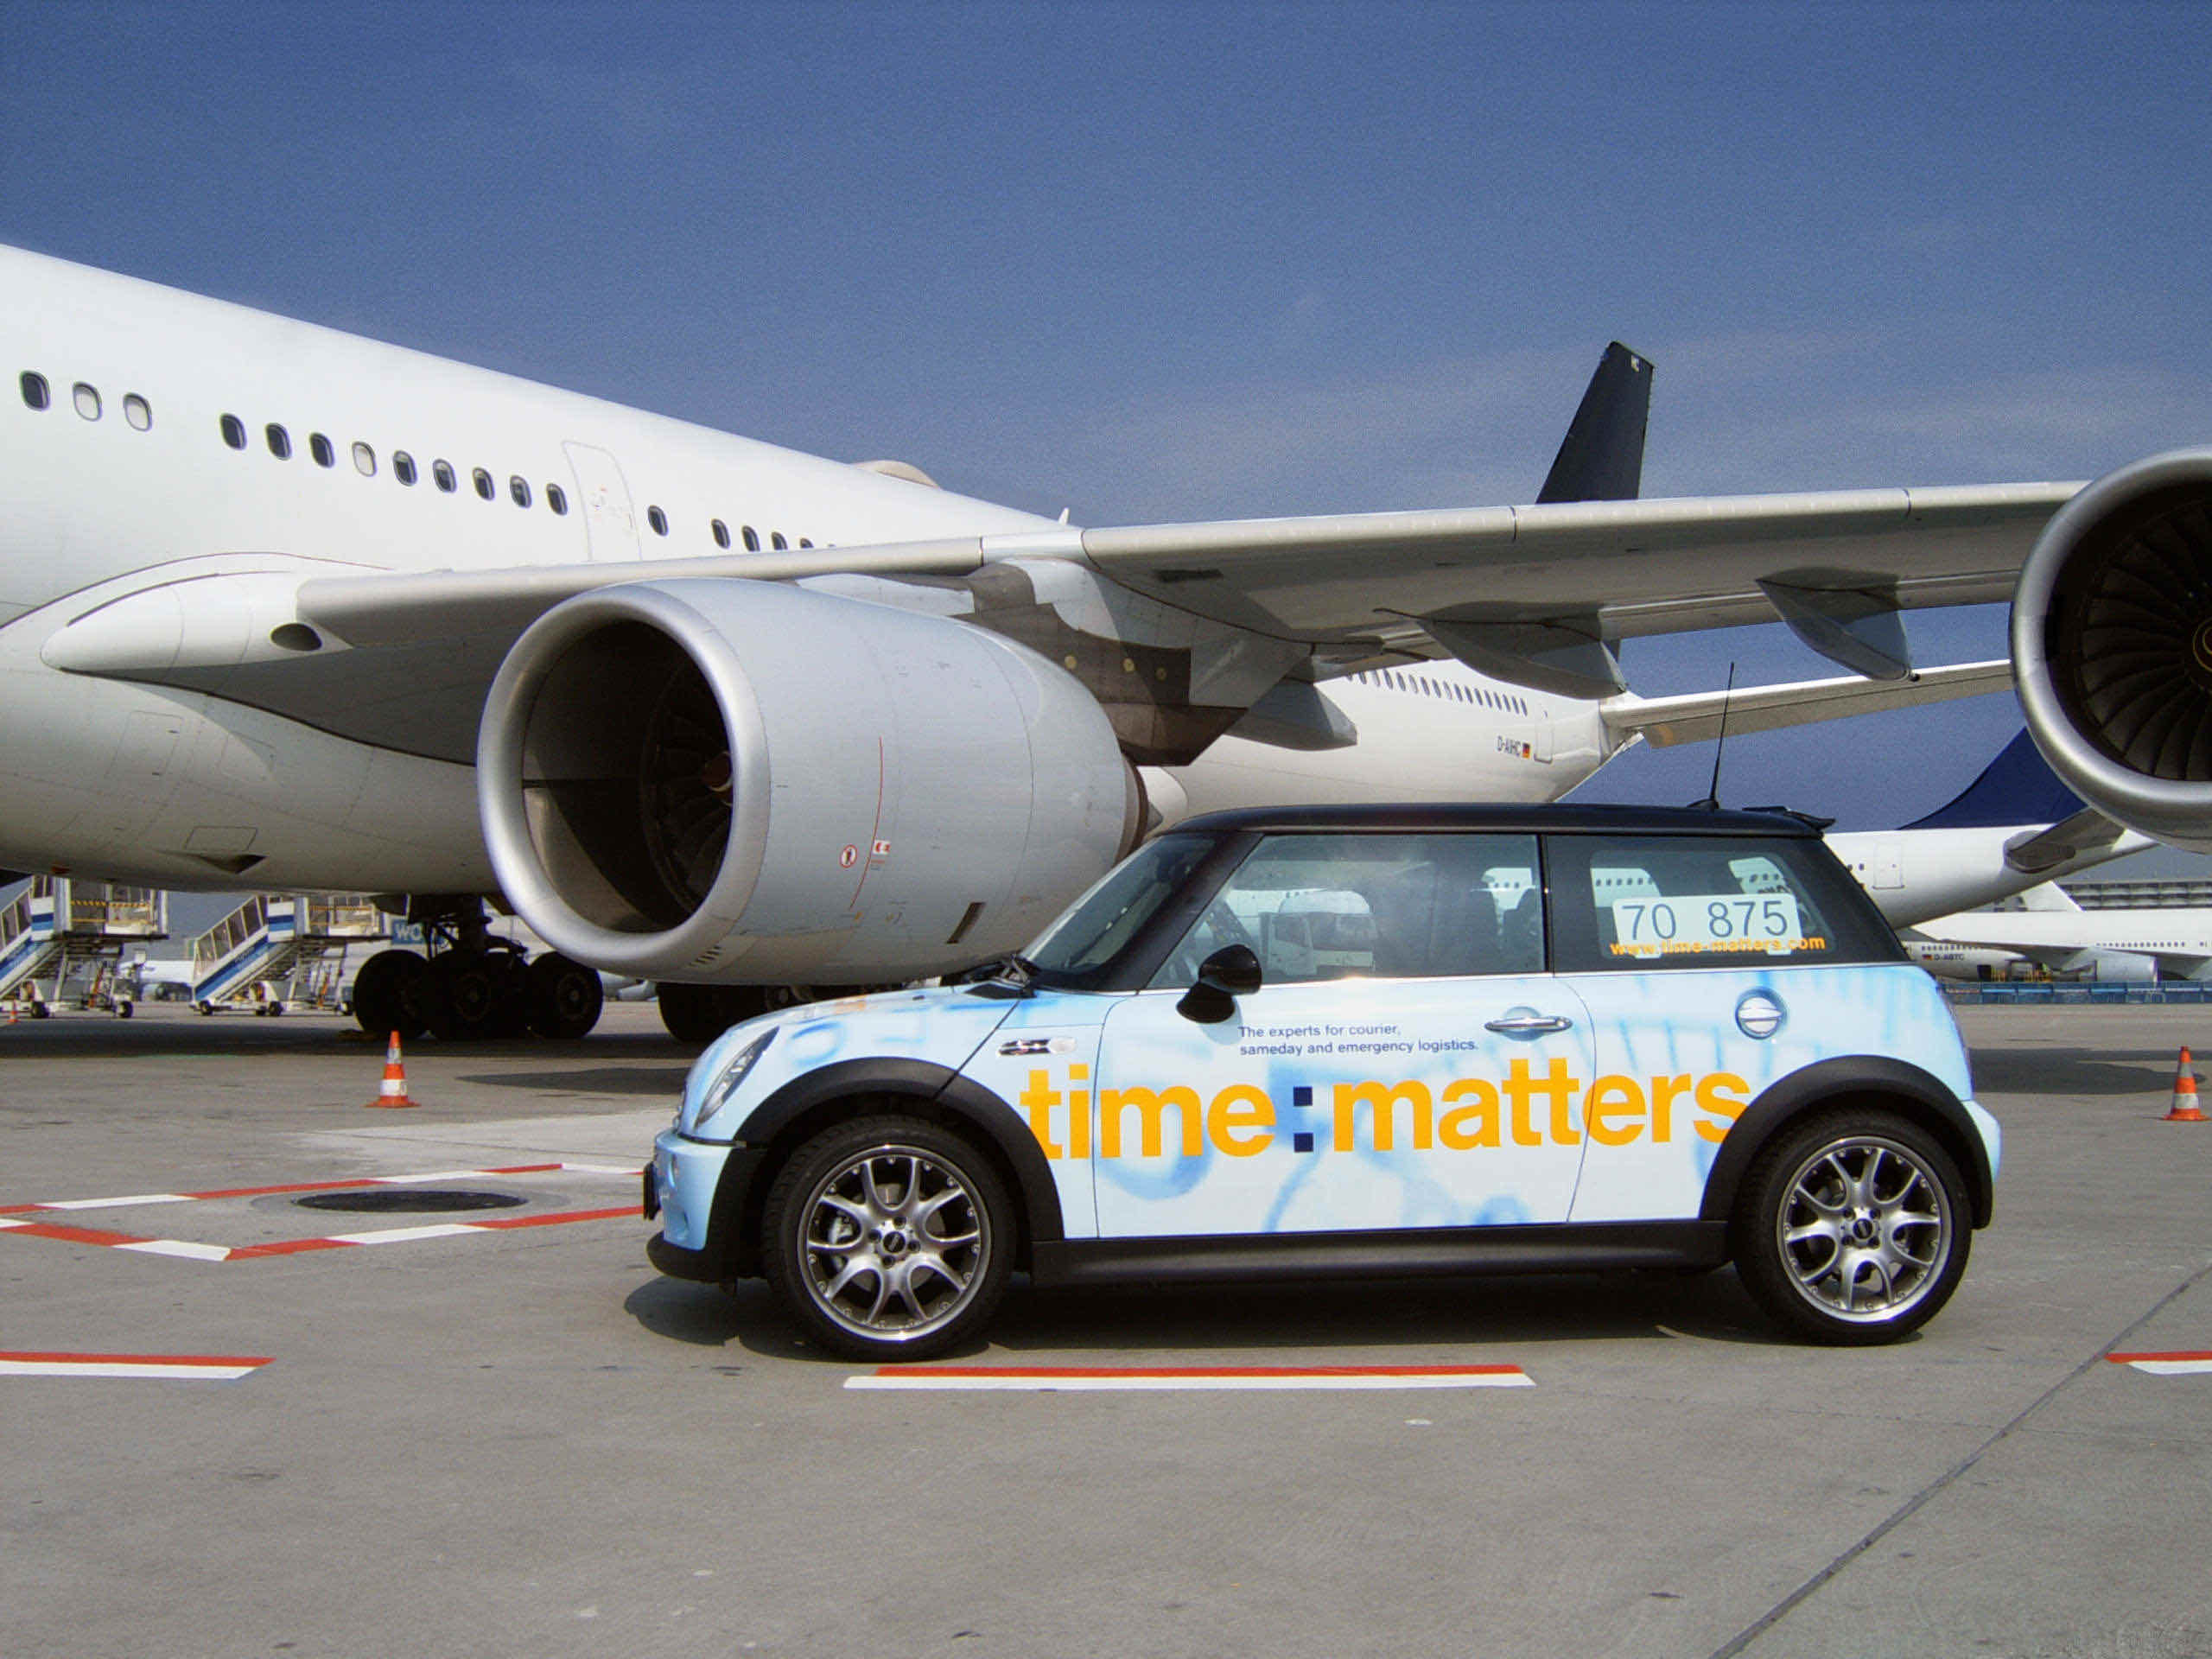 time:matters expands flight network from Germany to Spain